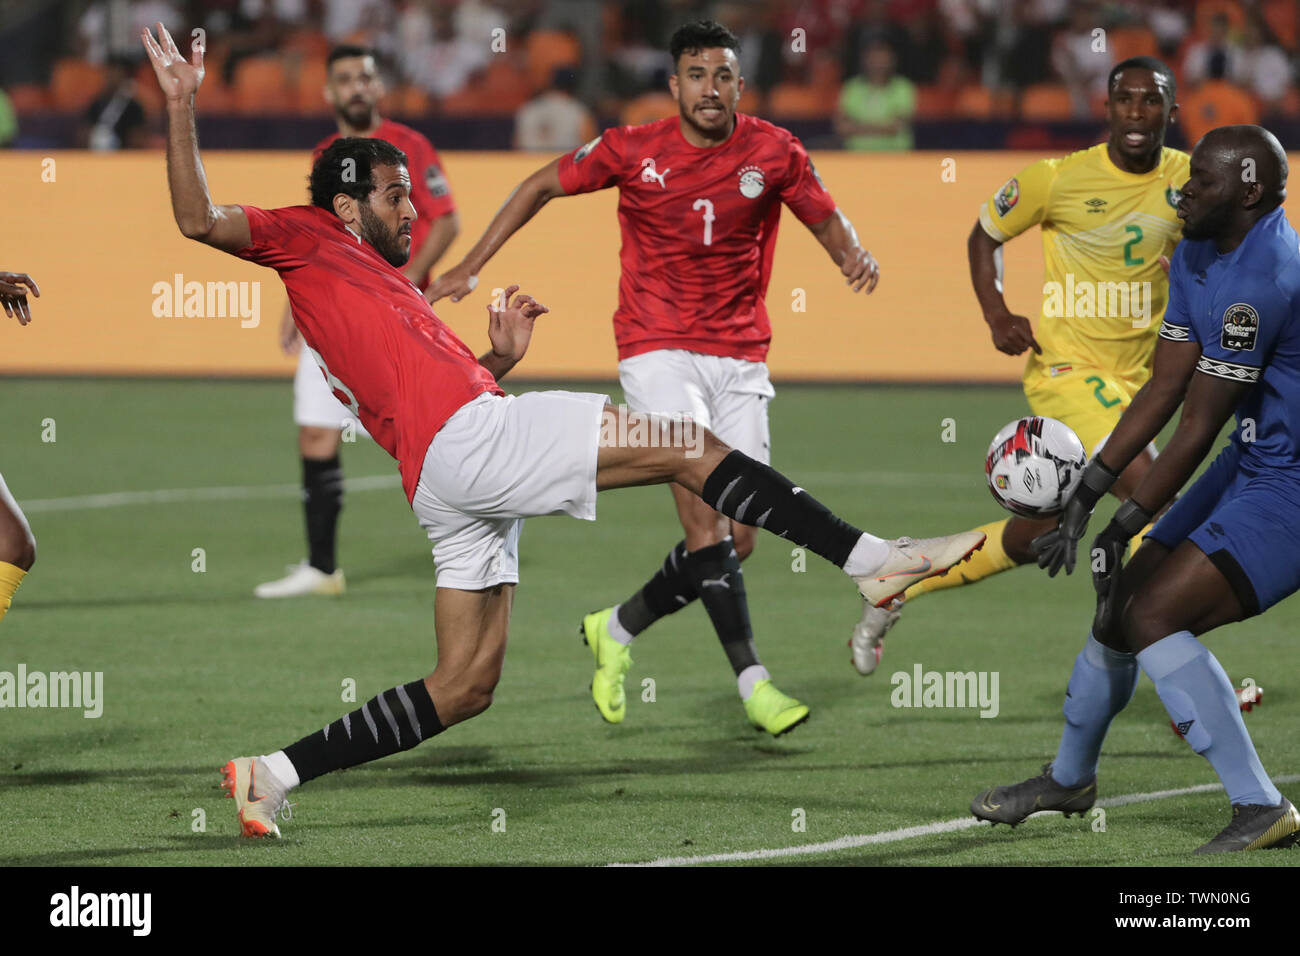 Cairo, Egypt. 21st June, 2019. Zimbabwe goalkeeper Edmore Sibanda (R) saves from Egypt's Marwan Mohsen (L) before they collide during the 2019 Africa Cup of Nations Group A soccer match between Egypt and Zimbabwe at the Cairo International Stadium. Credit: Oliver Weiken/dpa/Alamy Live News Stock Photo